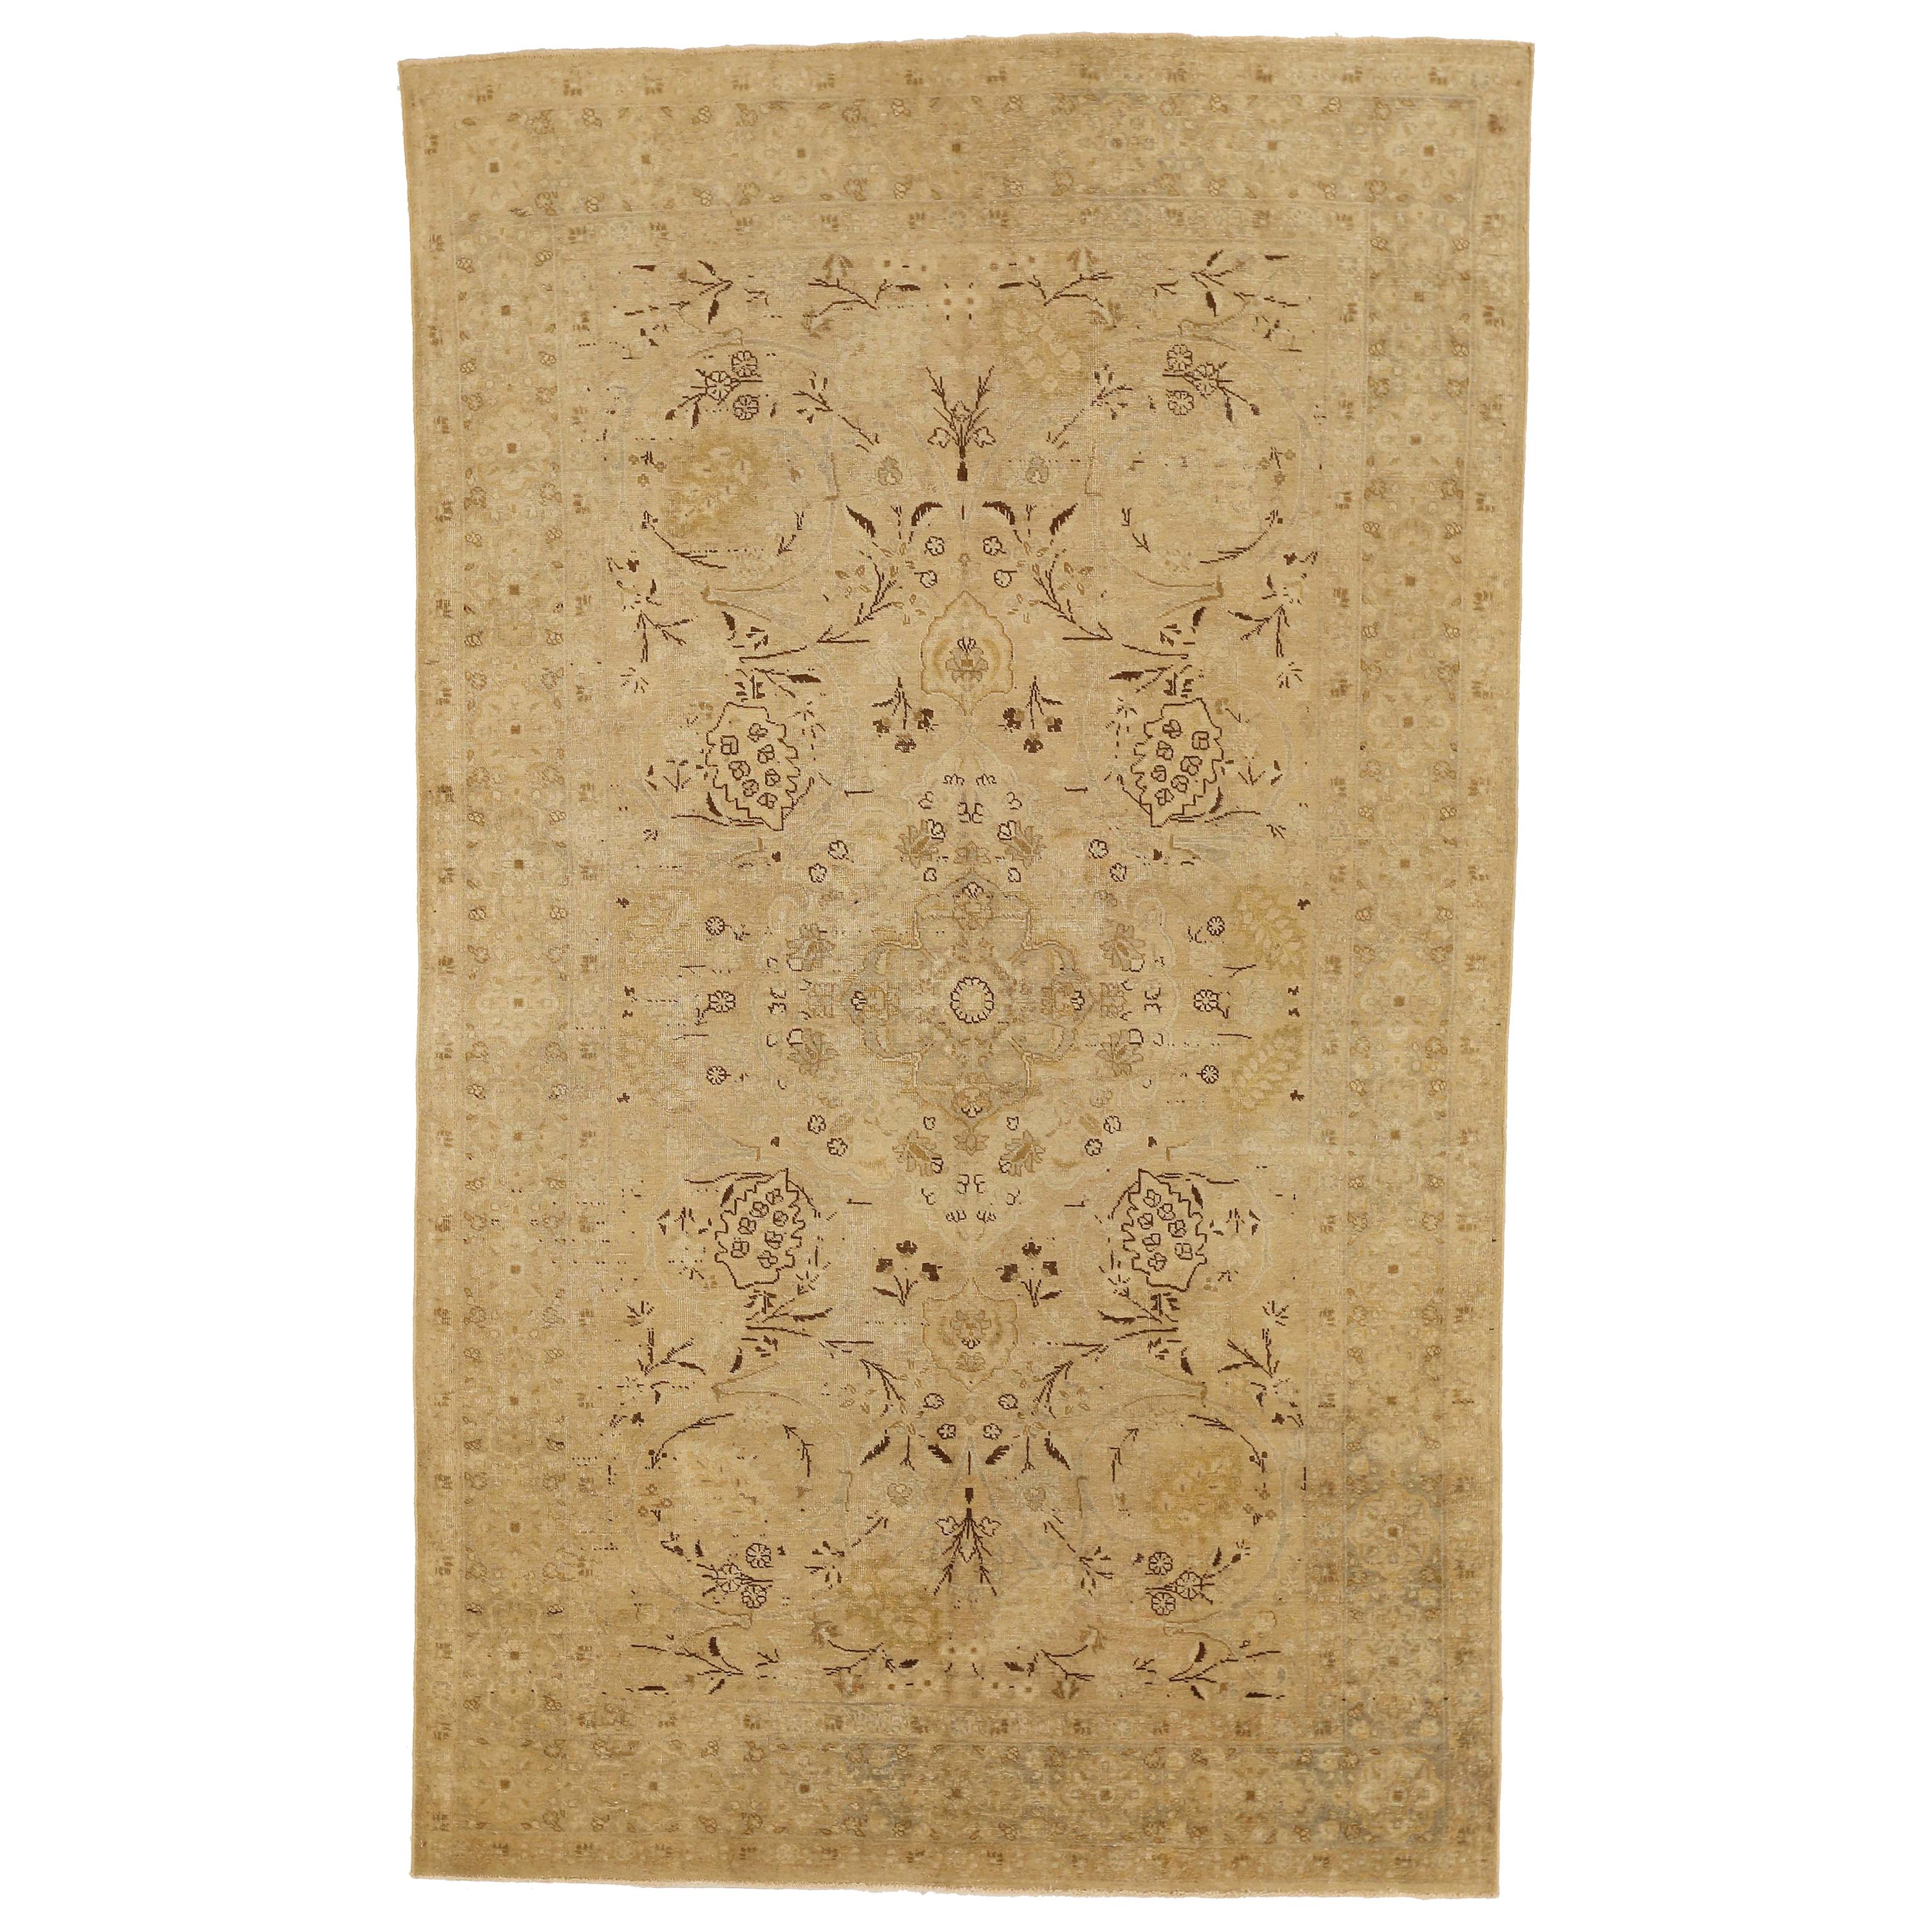 Antique Persian Tabriz Rug with Brown Botanical Details on Ivory Field